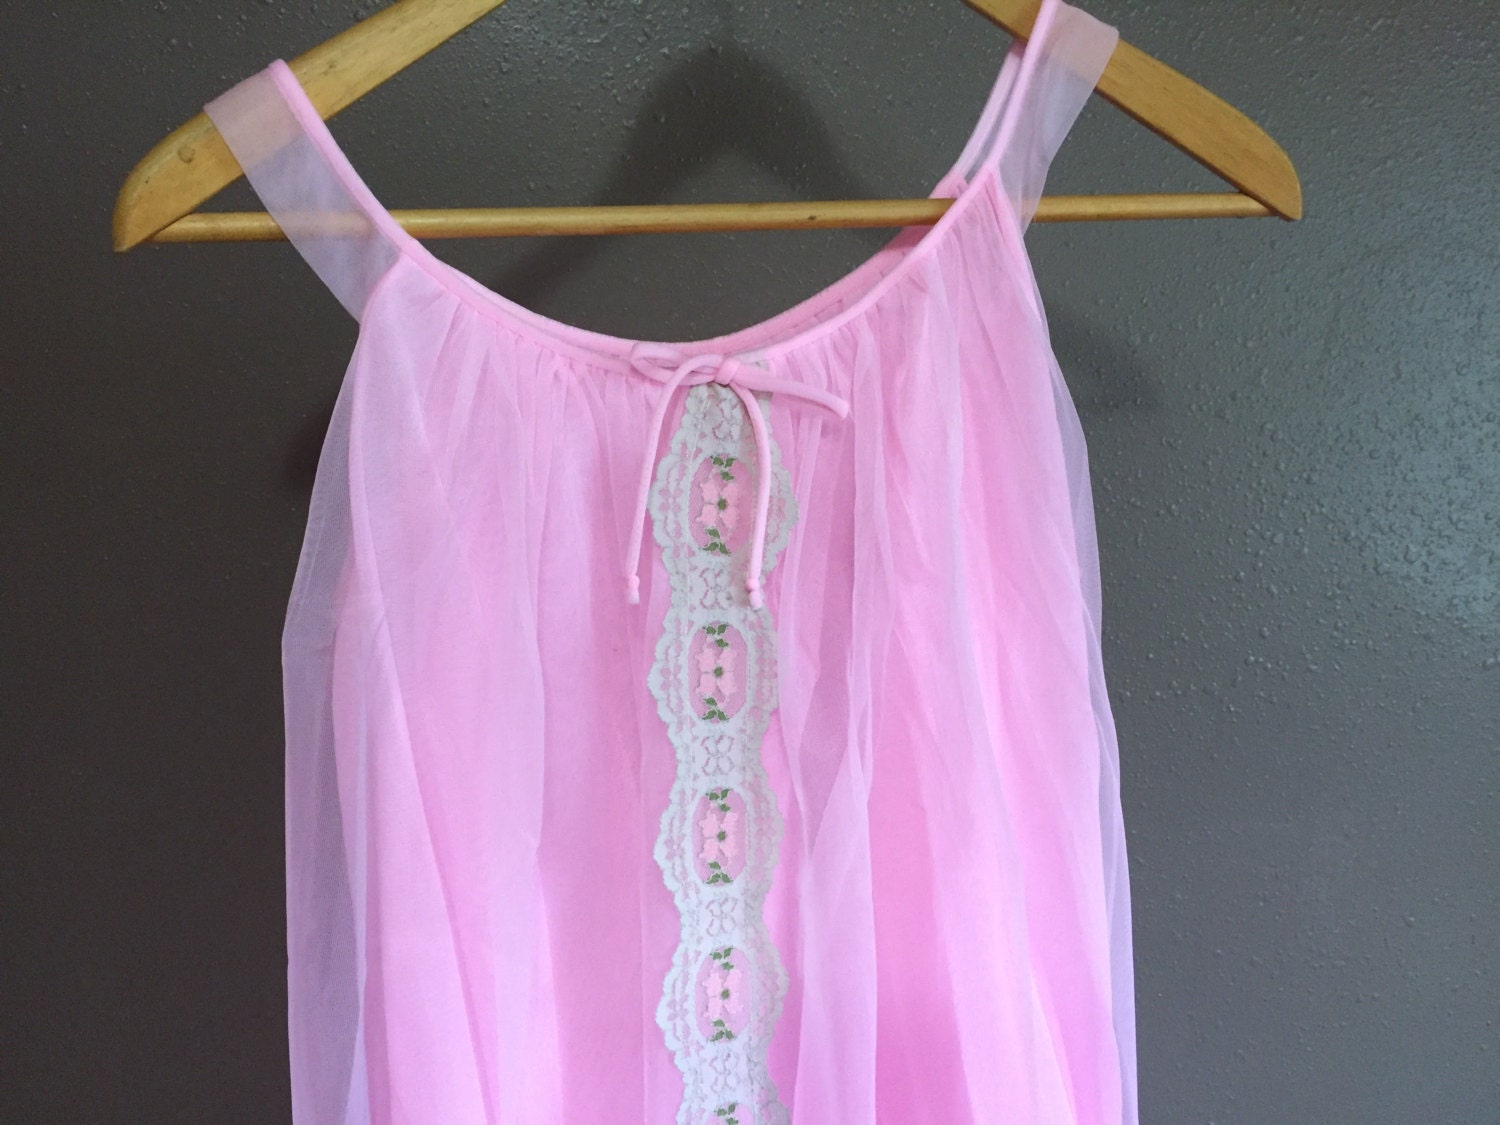 Retro Pink Baby Doll Night Gown/Negligee with Sheer Overlay